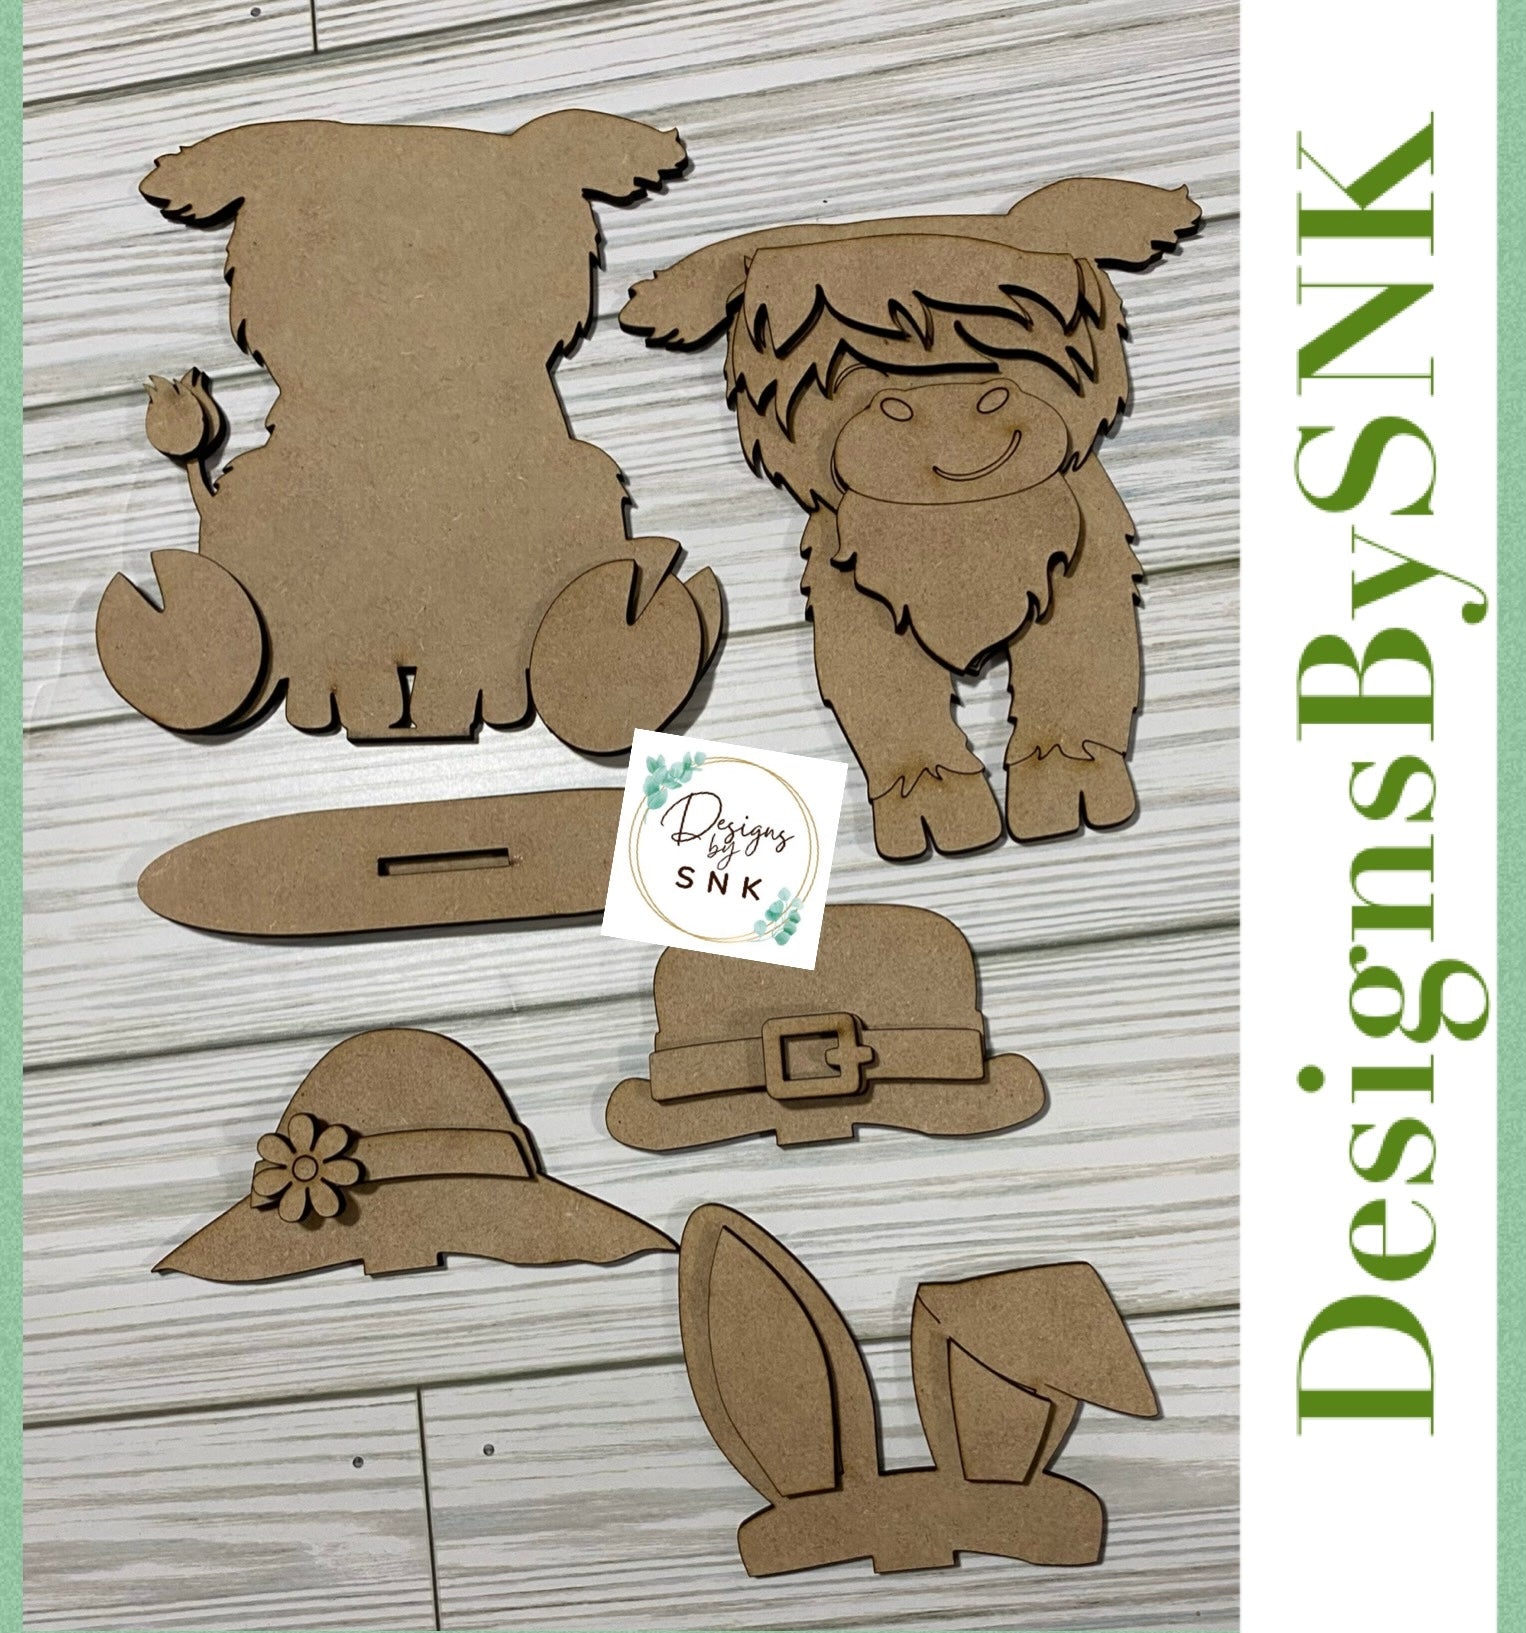 DIY KIT- Spring Highland Cow - Designs by SNK